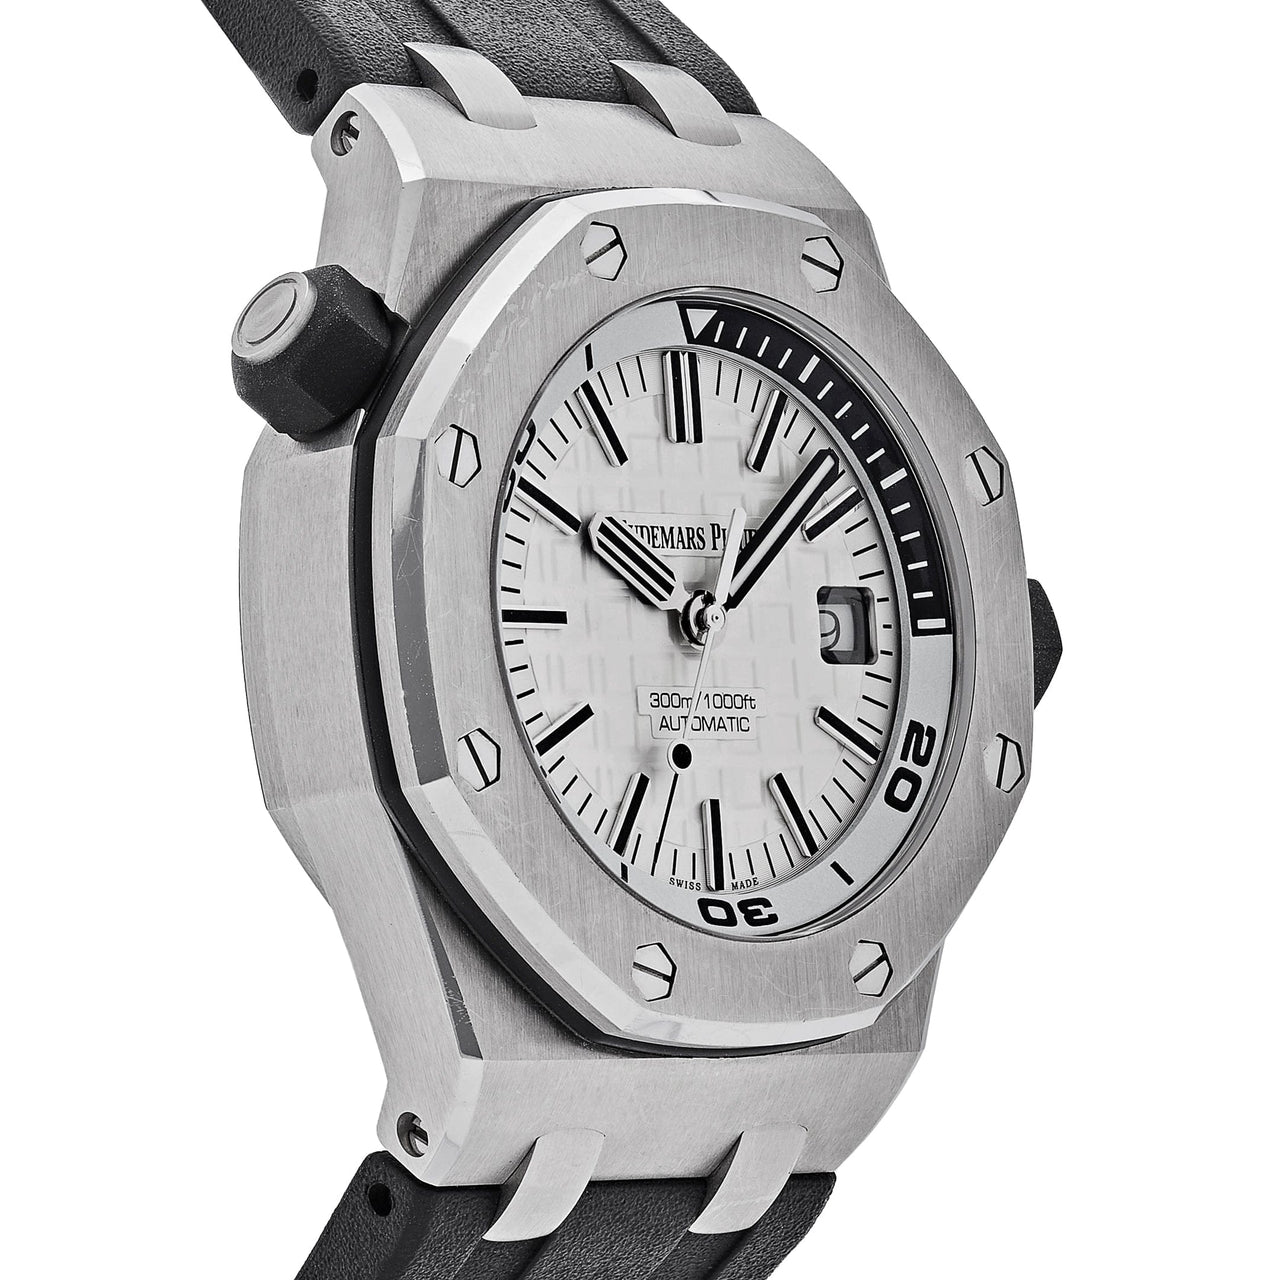 Audemars Piguet Royal Oak Offshore 15710ST.OO.A002CA.02  Diver Stainless Steel White Dial